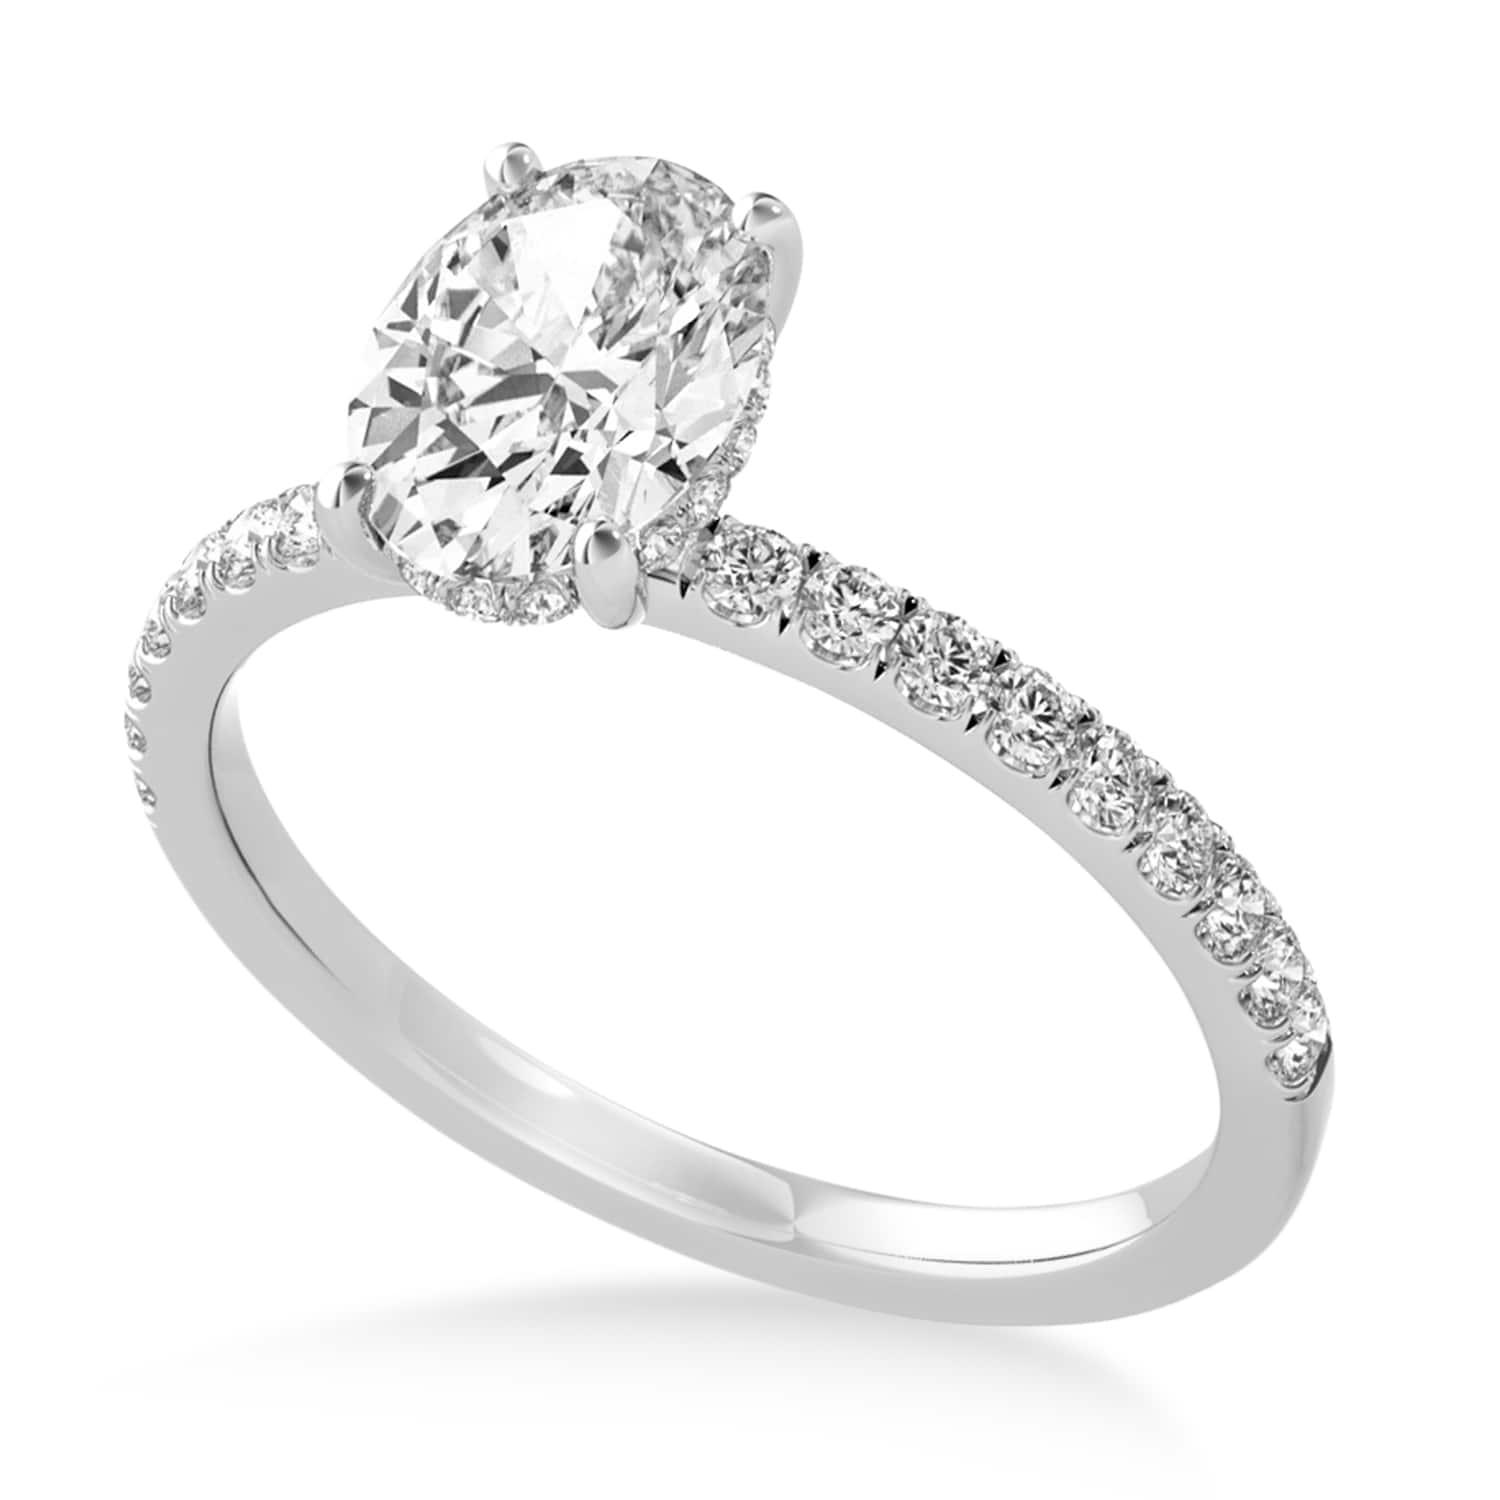 Oval Lab Grown Diamond Single Row Hidden Halo Engagement Ring 14k White Gold (2.50ct)